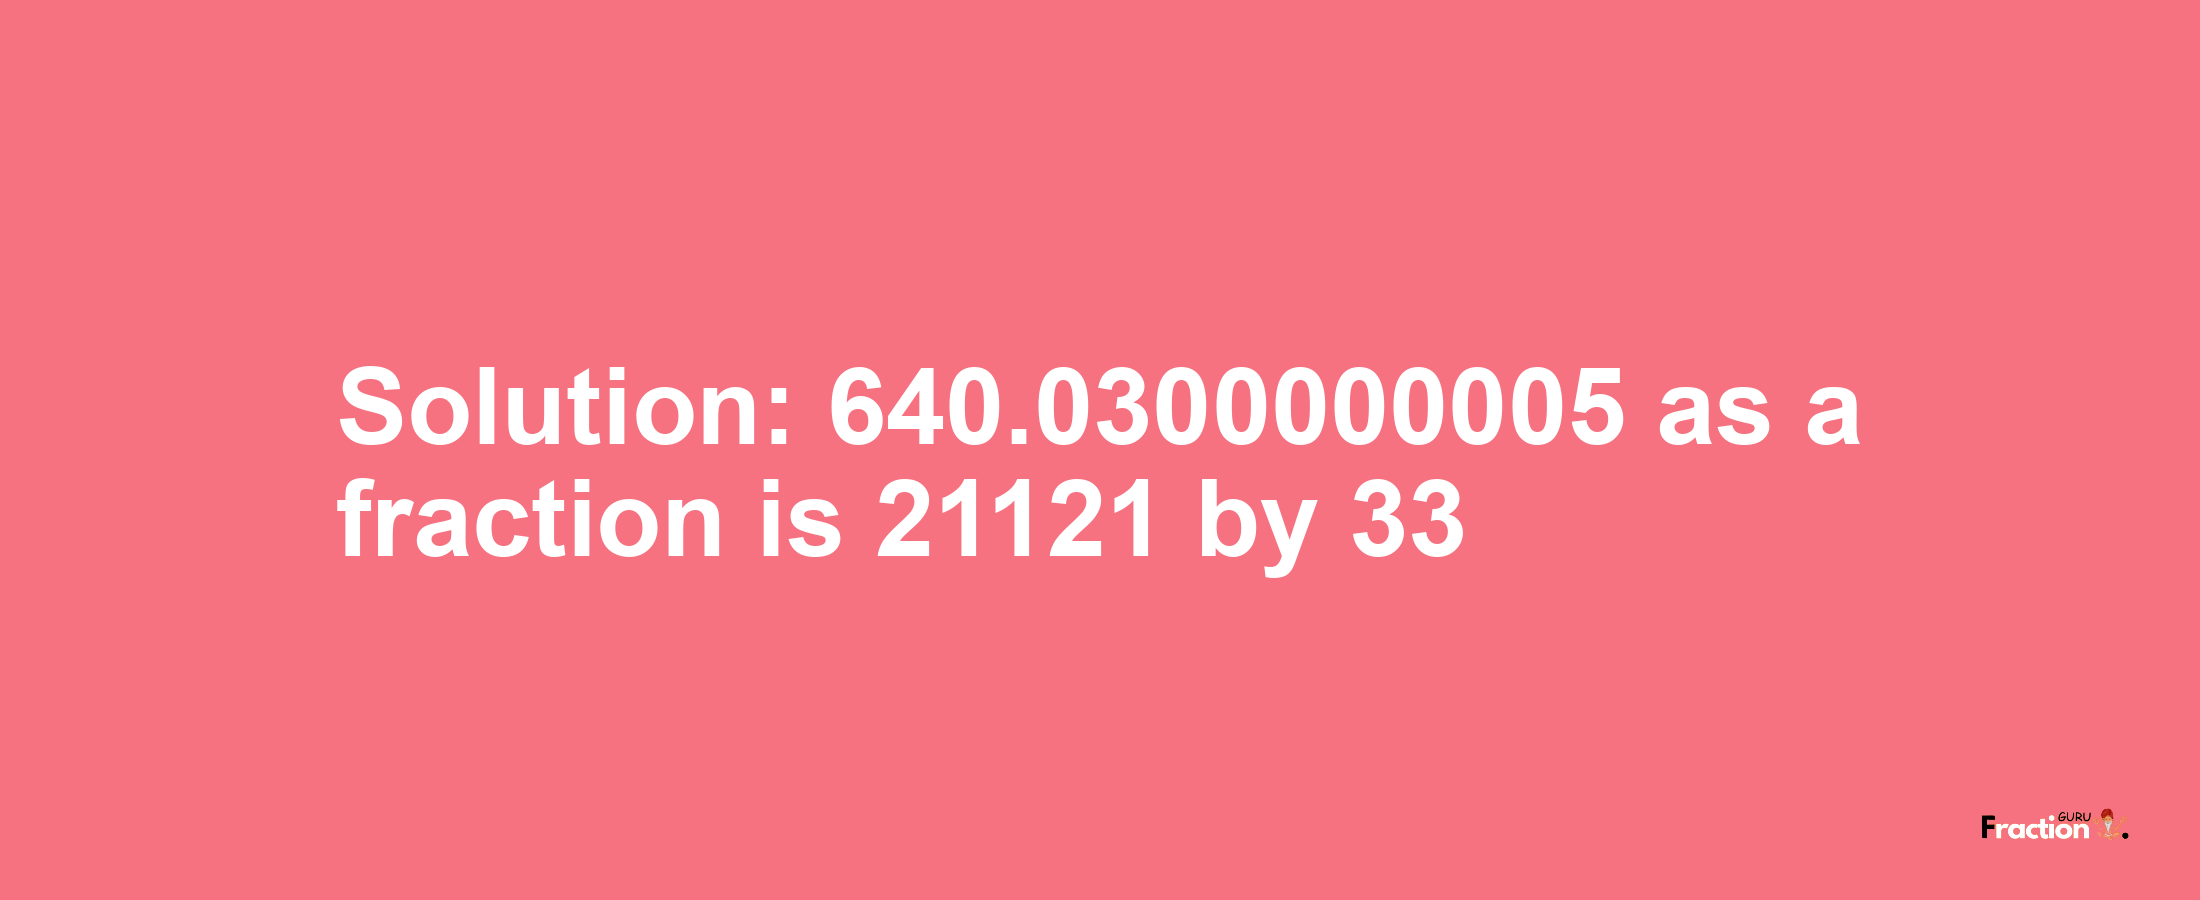 Solution:640.0300000005 as a fraction is 21121/33